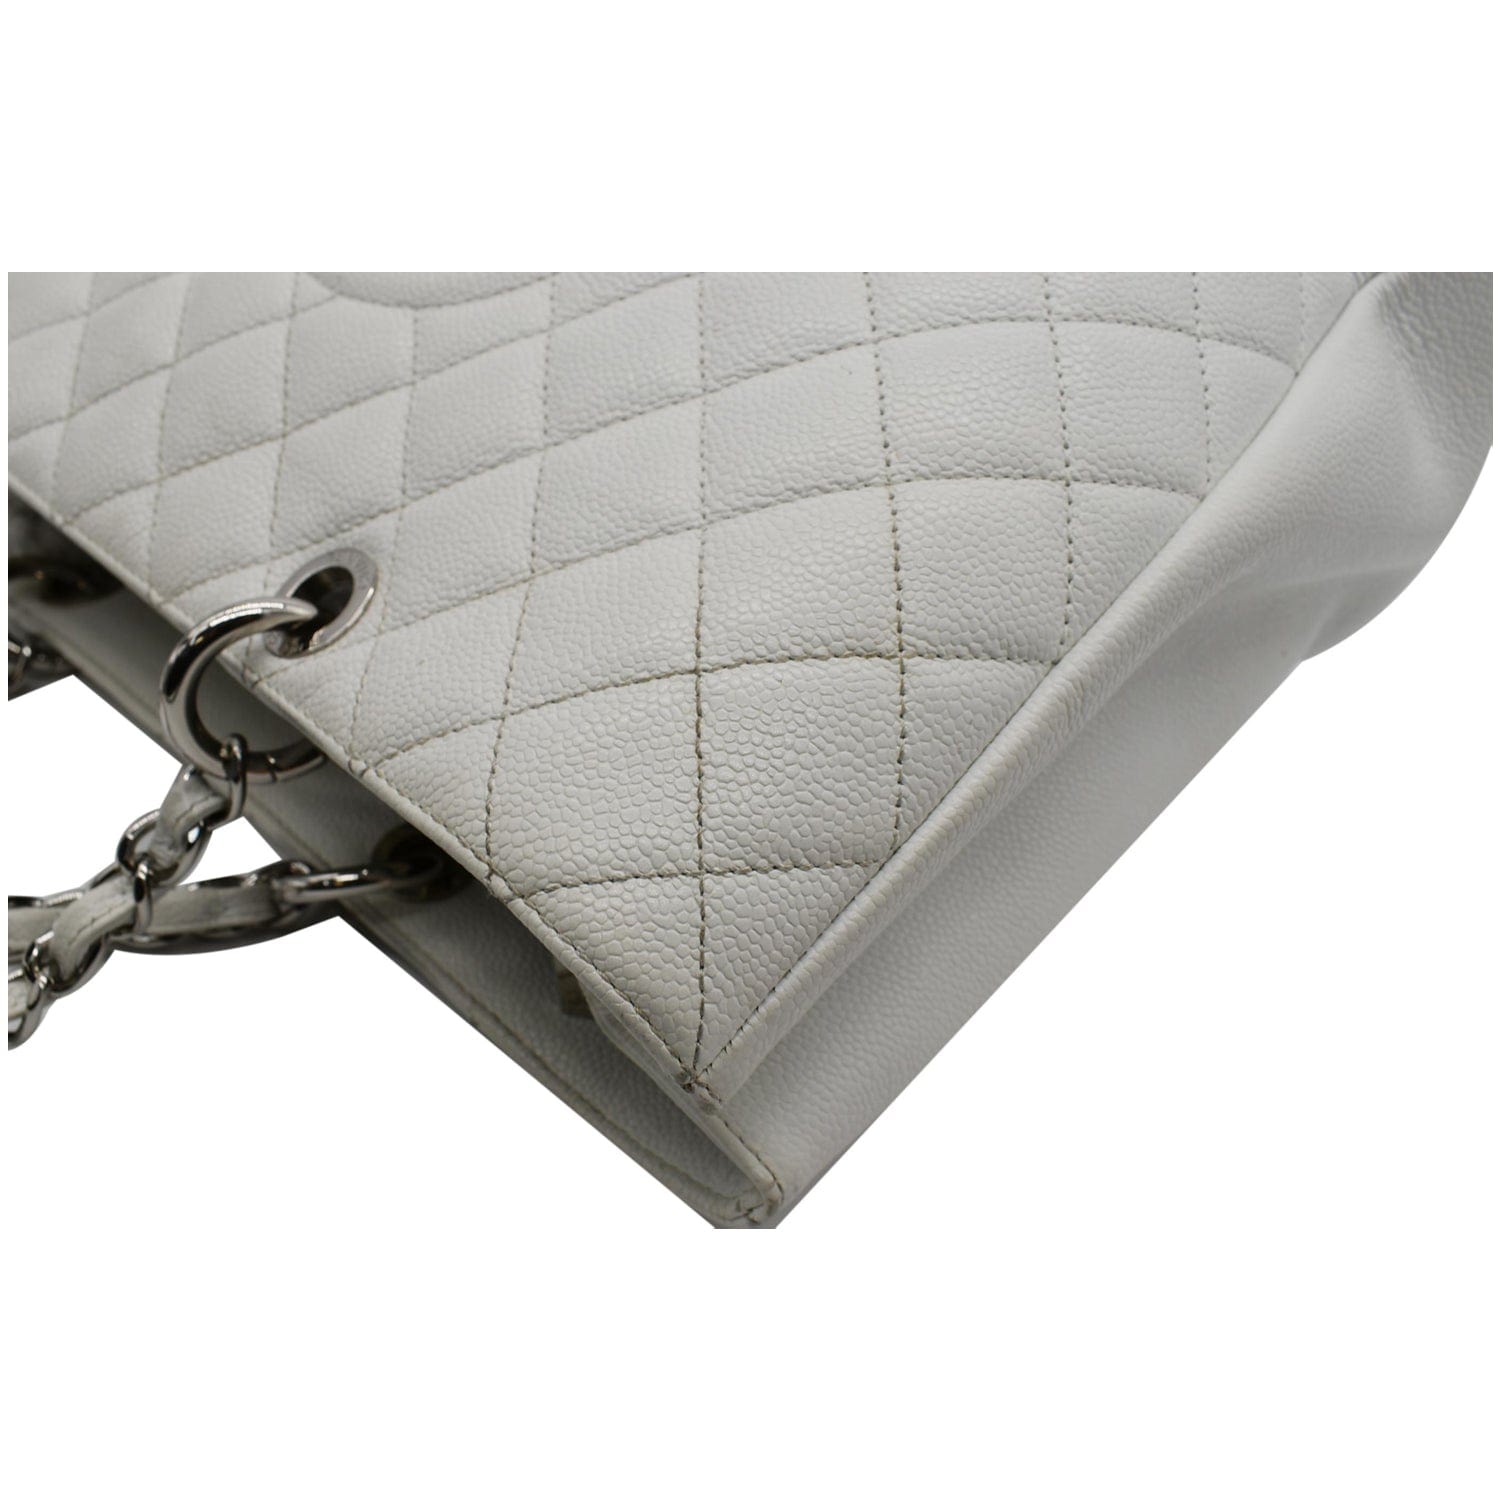 CHANEL XL Grand Quilted Caviar Leather Shopping Tote Bag White- 15% OF